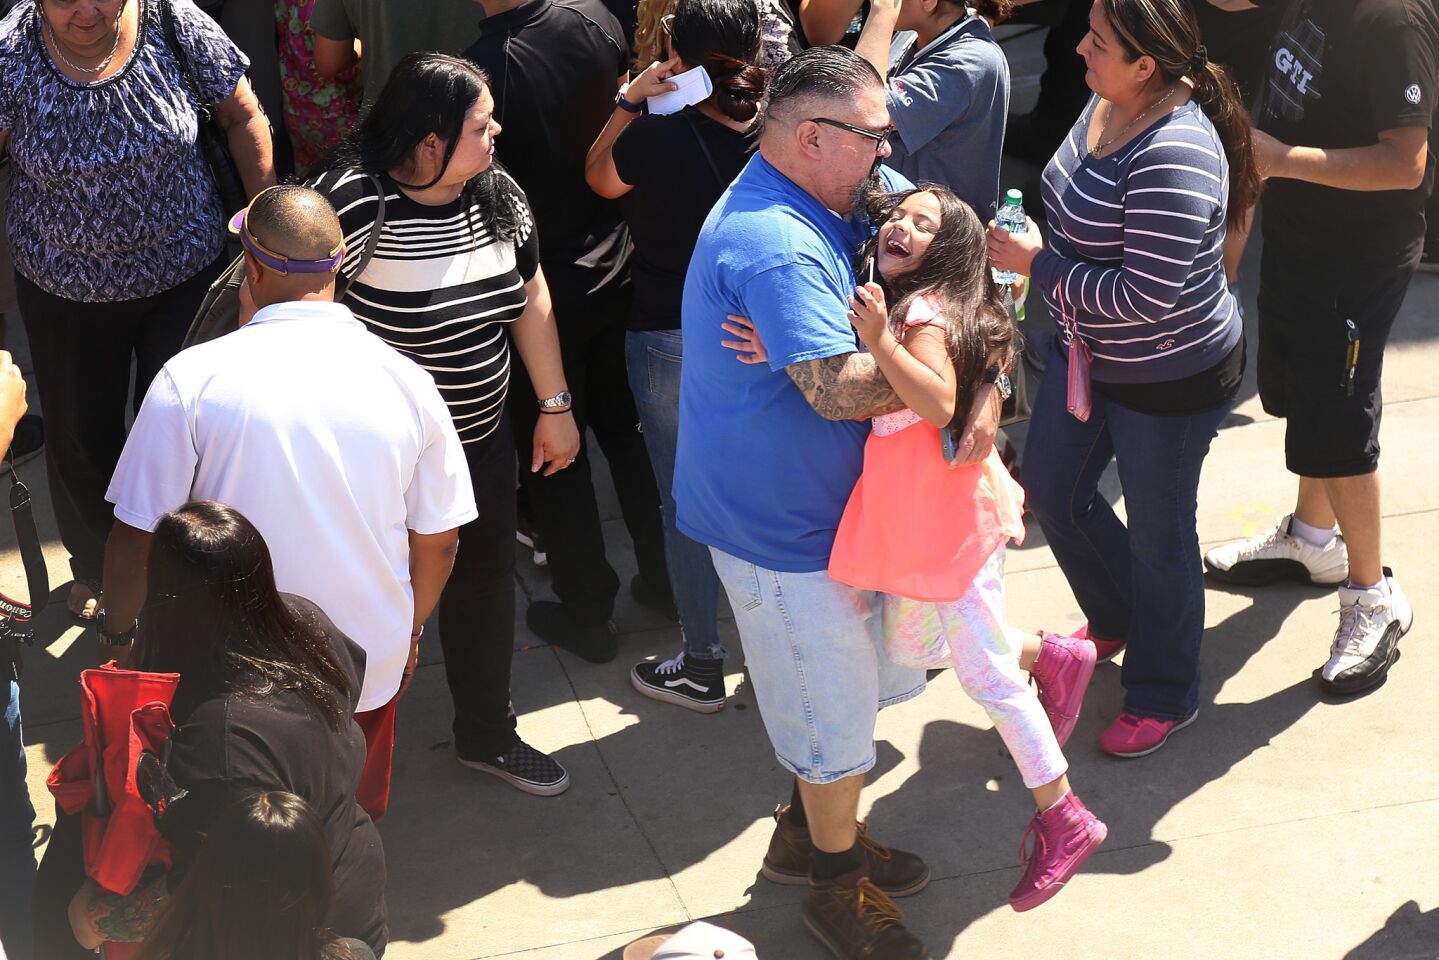 Parents are reunited with their children at Cajon High School after a school shooting at North Park Elementary School.